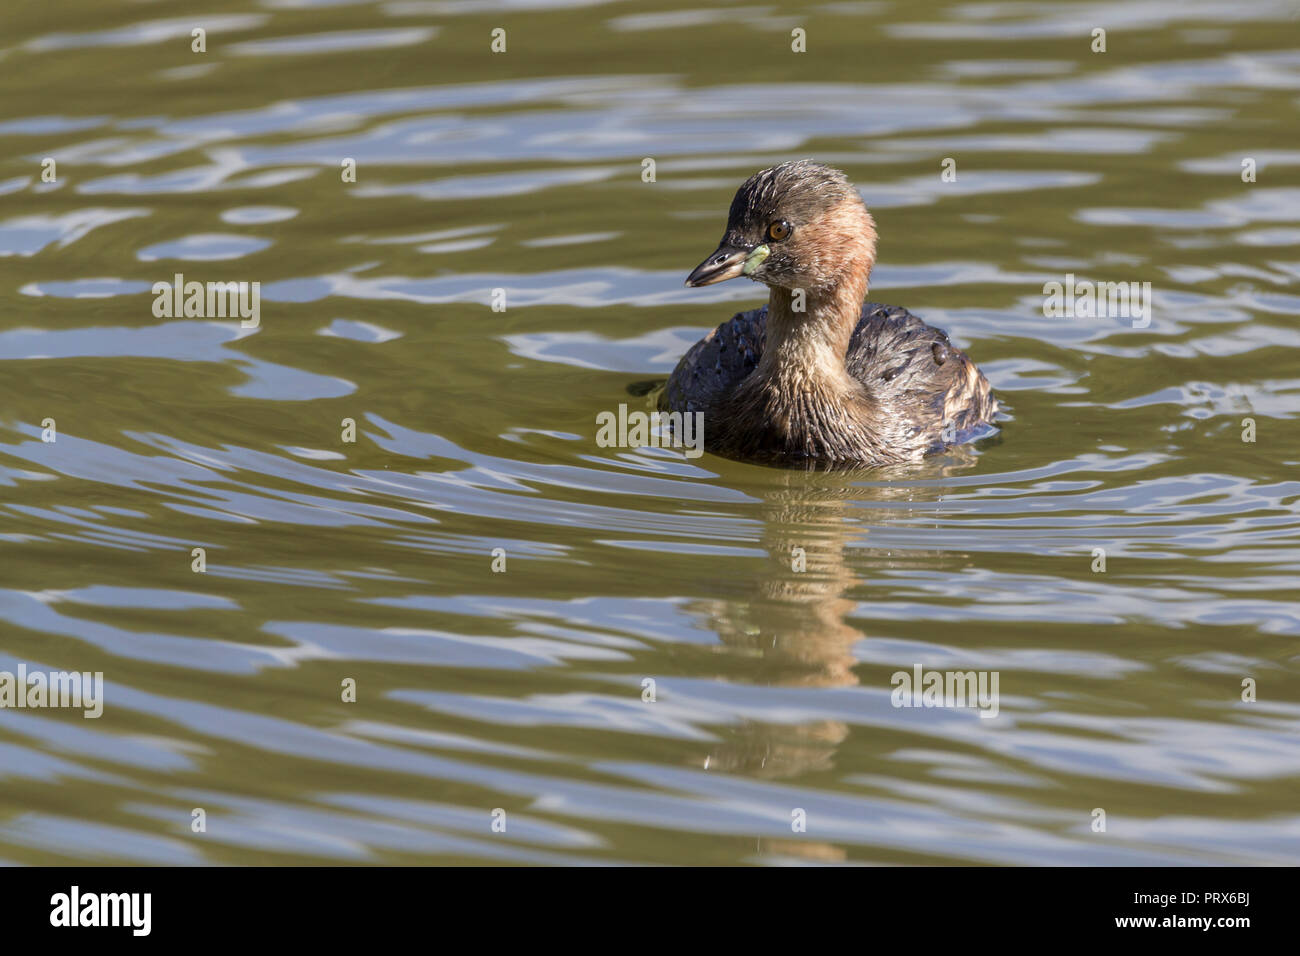 Little Grebe (Tachybaptus ruficollis) smallest grebe. Round almost tailless swims buoyantly dives often. Has pale yellow spot on base of short bill. Stock Photo